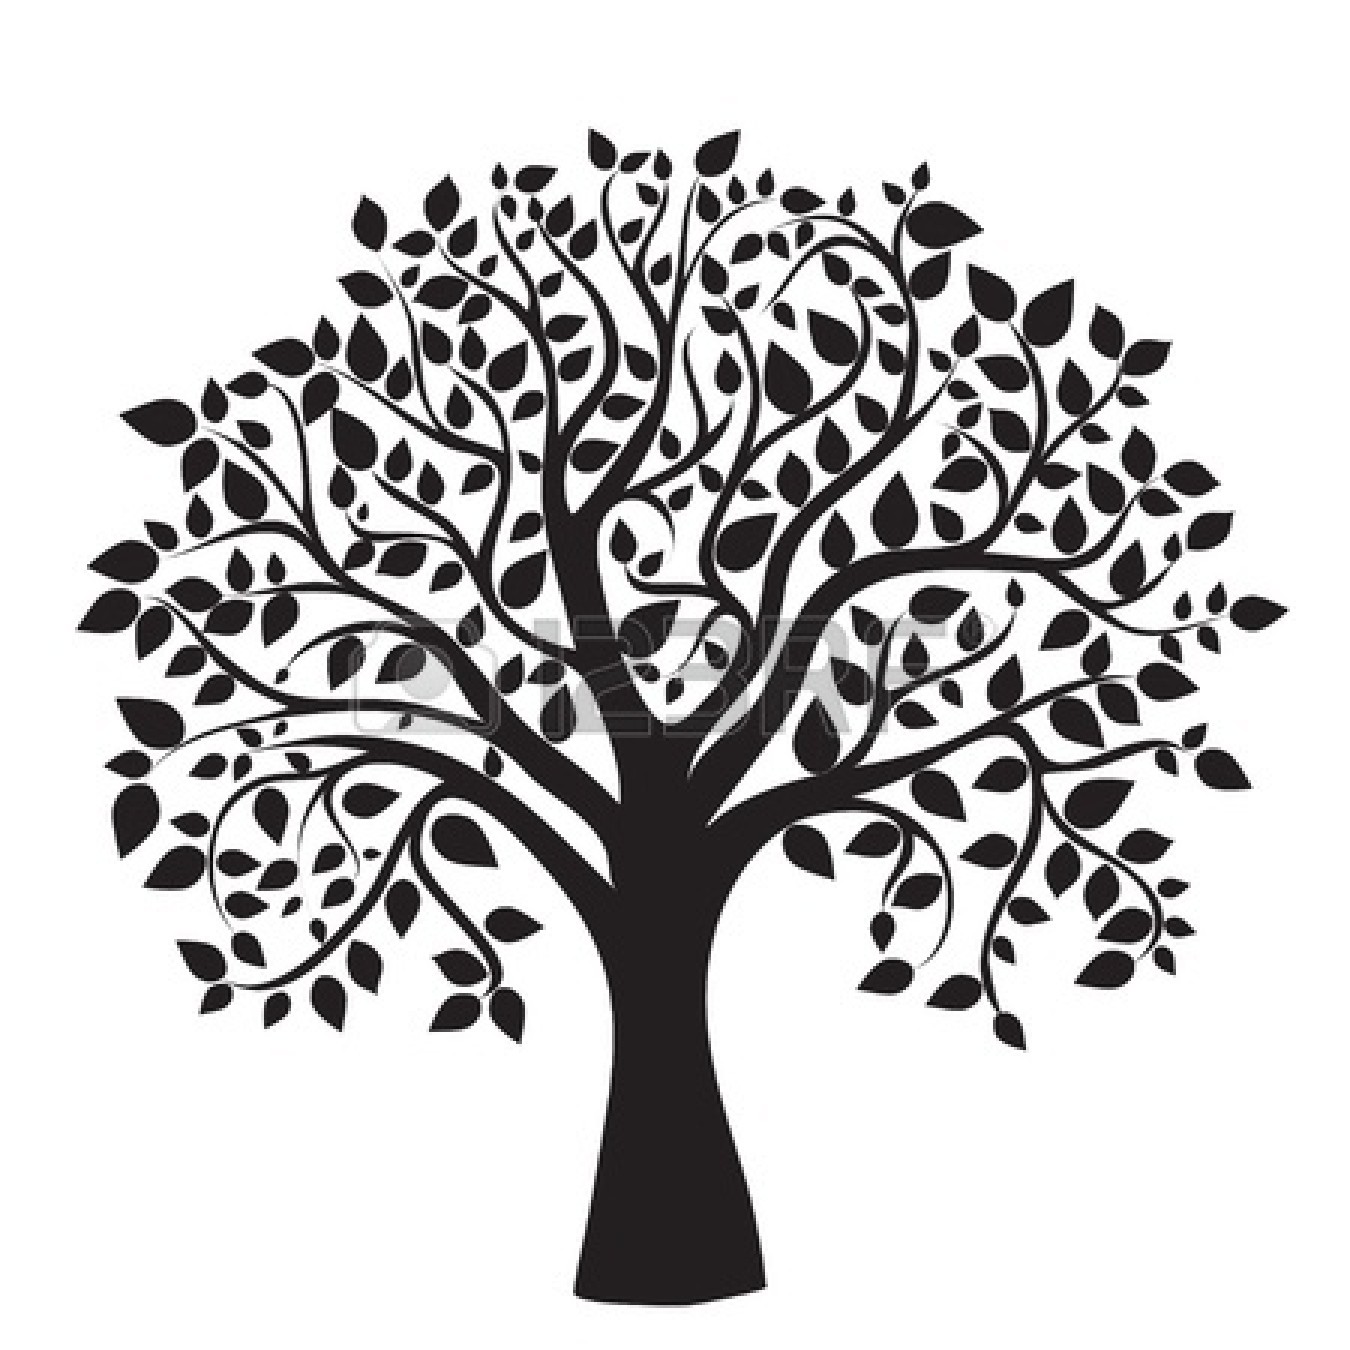 Free Tree Of Life Silhouette Clip Art Download Free Tree Of Life Silhouette Clip Art Png Images